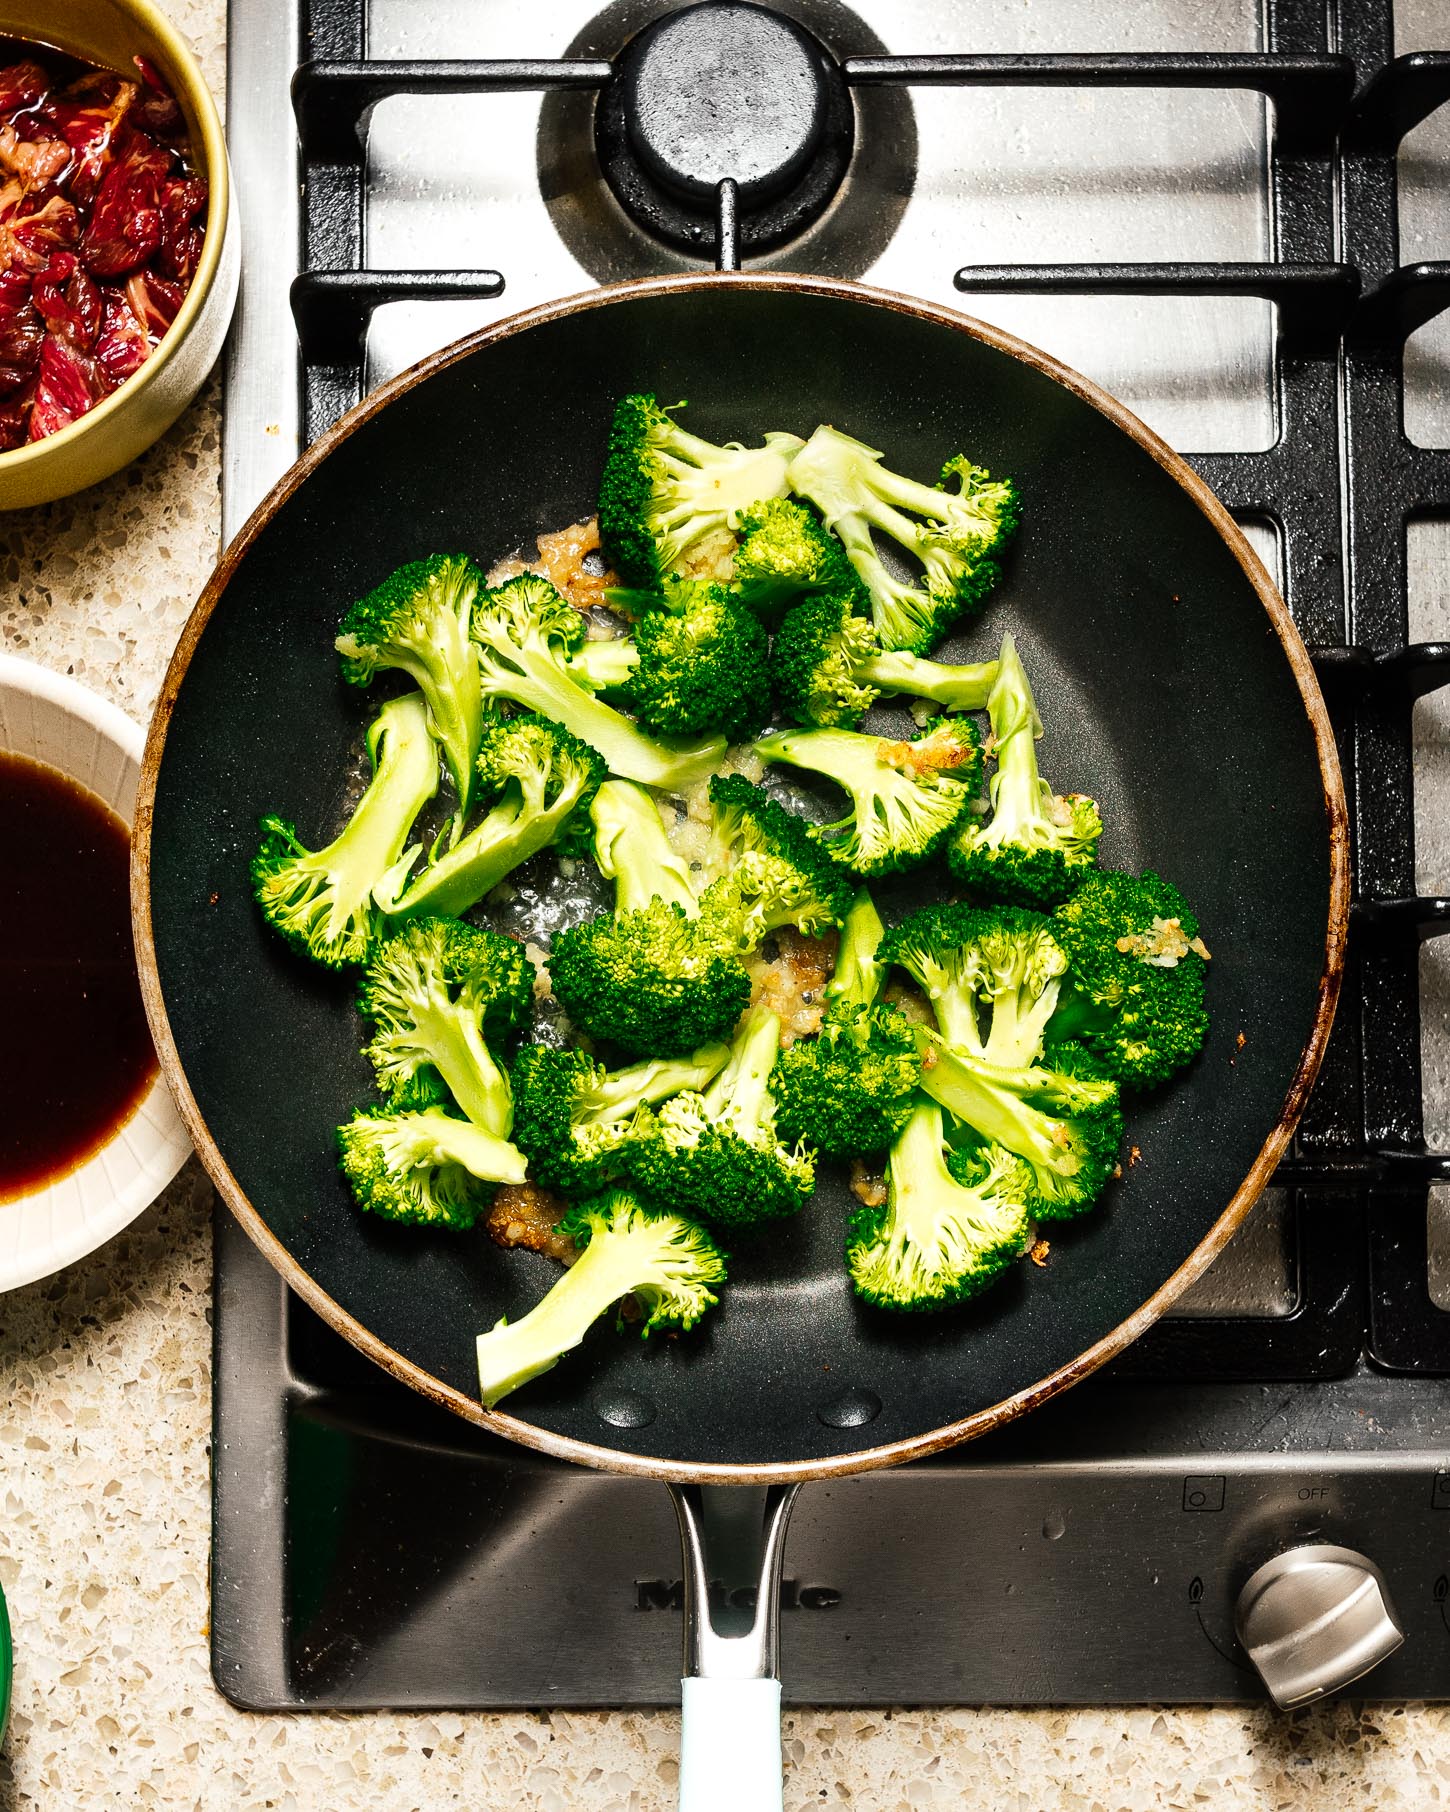 This easy keto friendly low-carb beef and broccoli stir fry is for all my peeps who are trying to enjoy life while still cutting down on carbs. Savory juicy beef and tender green broccoli in an addictive sauce. Super tasty and quick. Meal prep it for the week (double the batch) and you’re golden! #keto #ketofriendly #protein #macros #stirfry #cauliflowerrice #beefandbroccoli